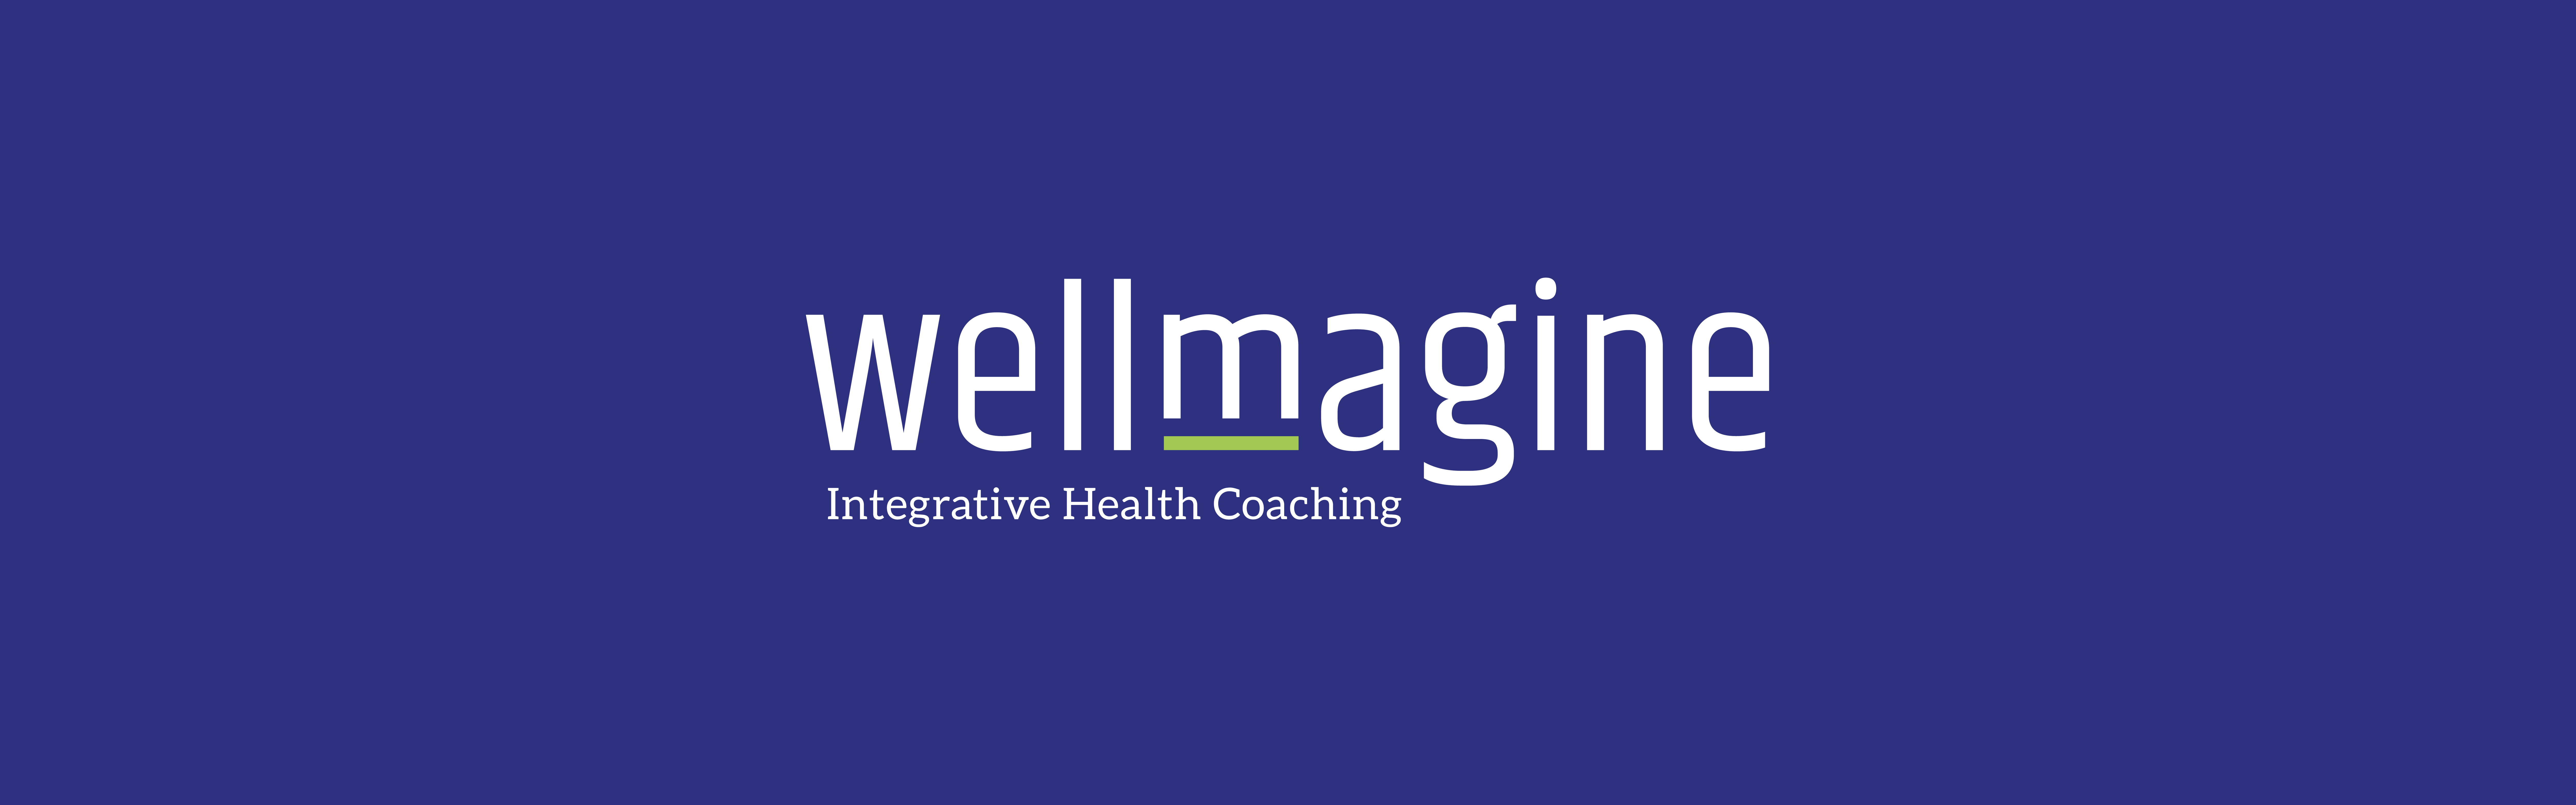 Logo of "Wellmagine," featuring the text "integrative health coaching" on a purple background.